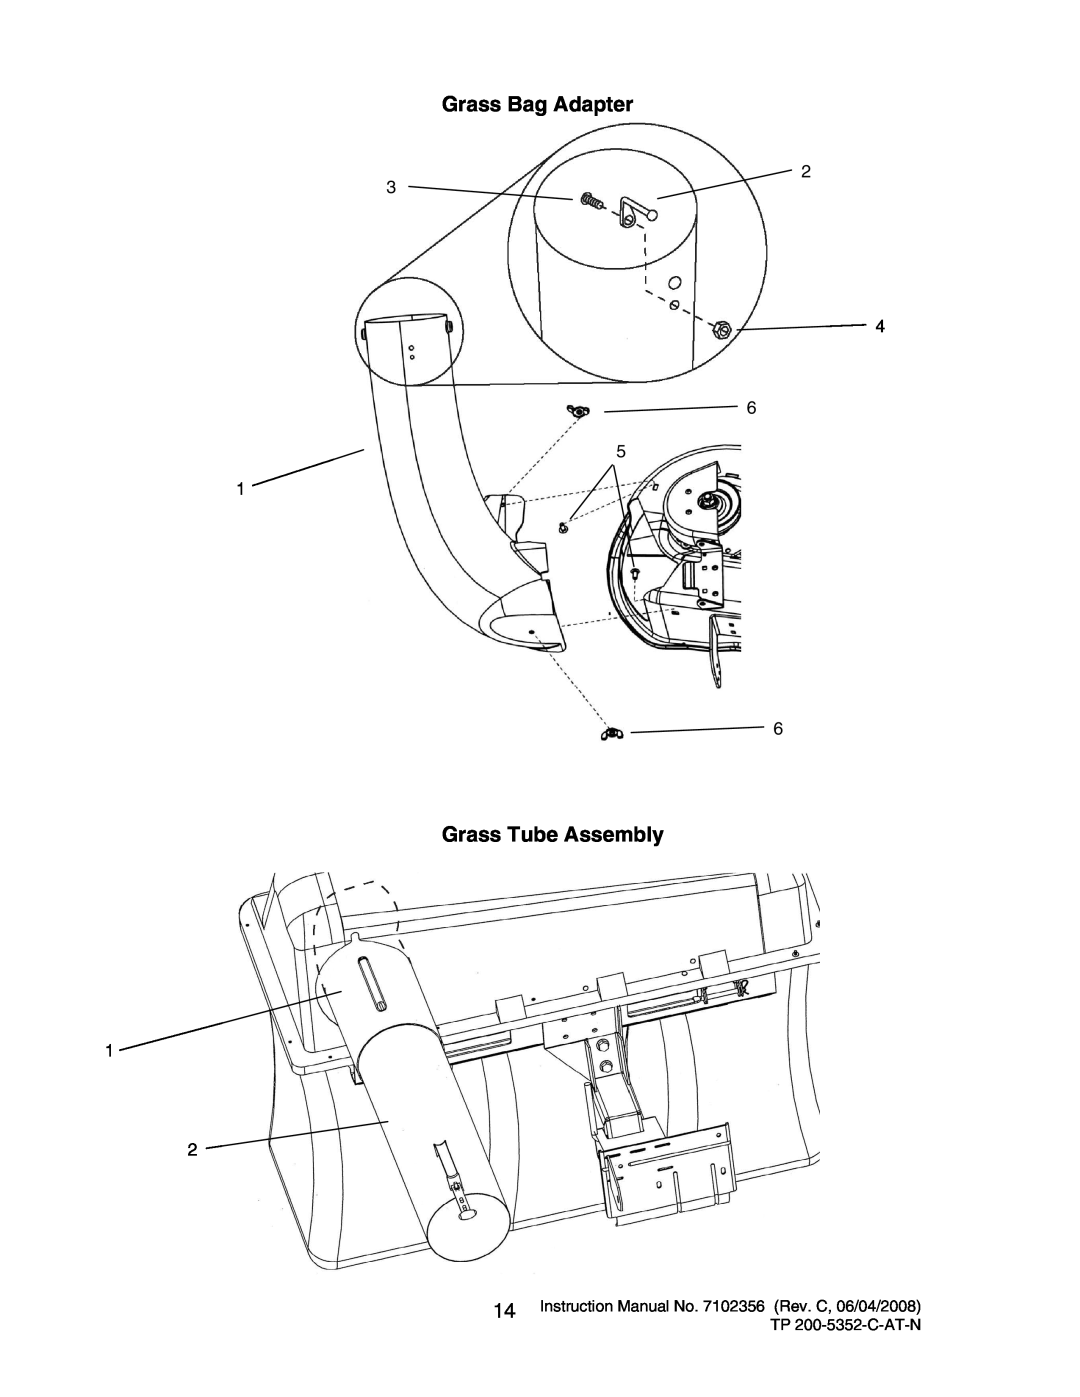 Snapper 7600069 - 7600070 instruction manual Grass Bag Adapter, Grass Tube Assembly 